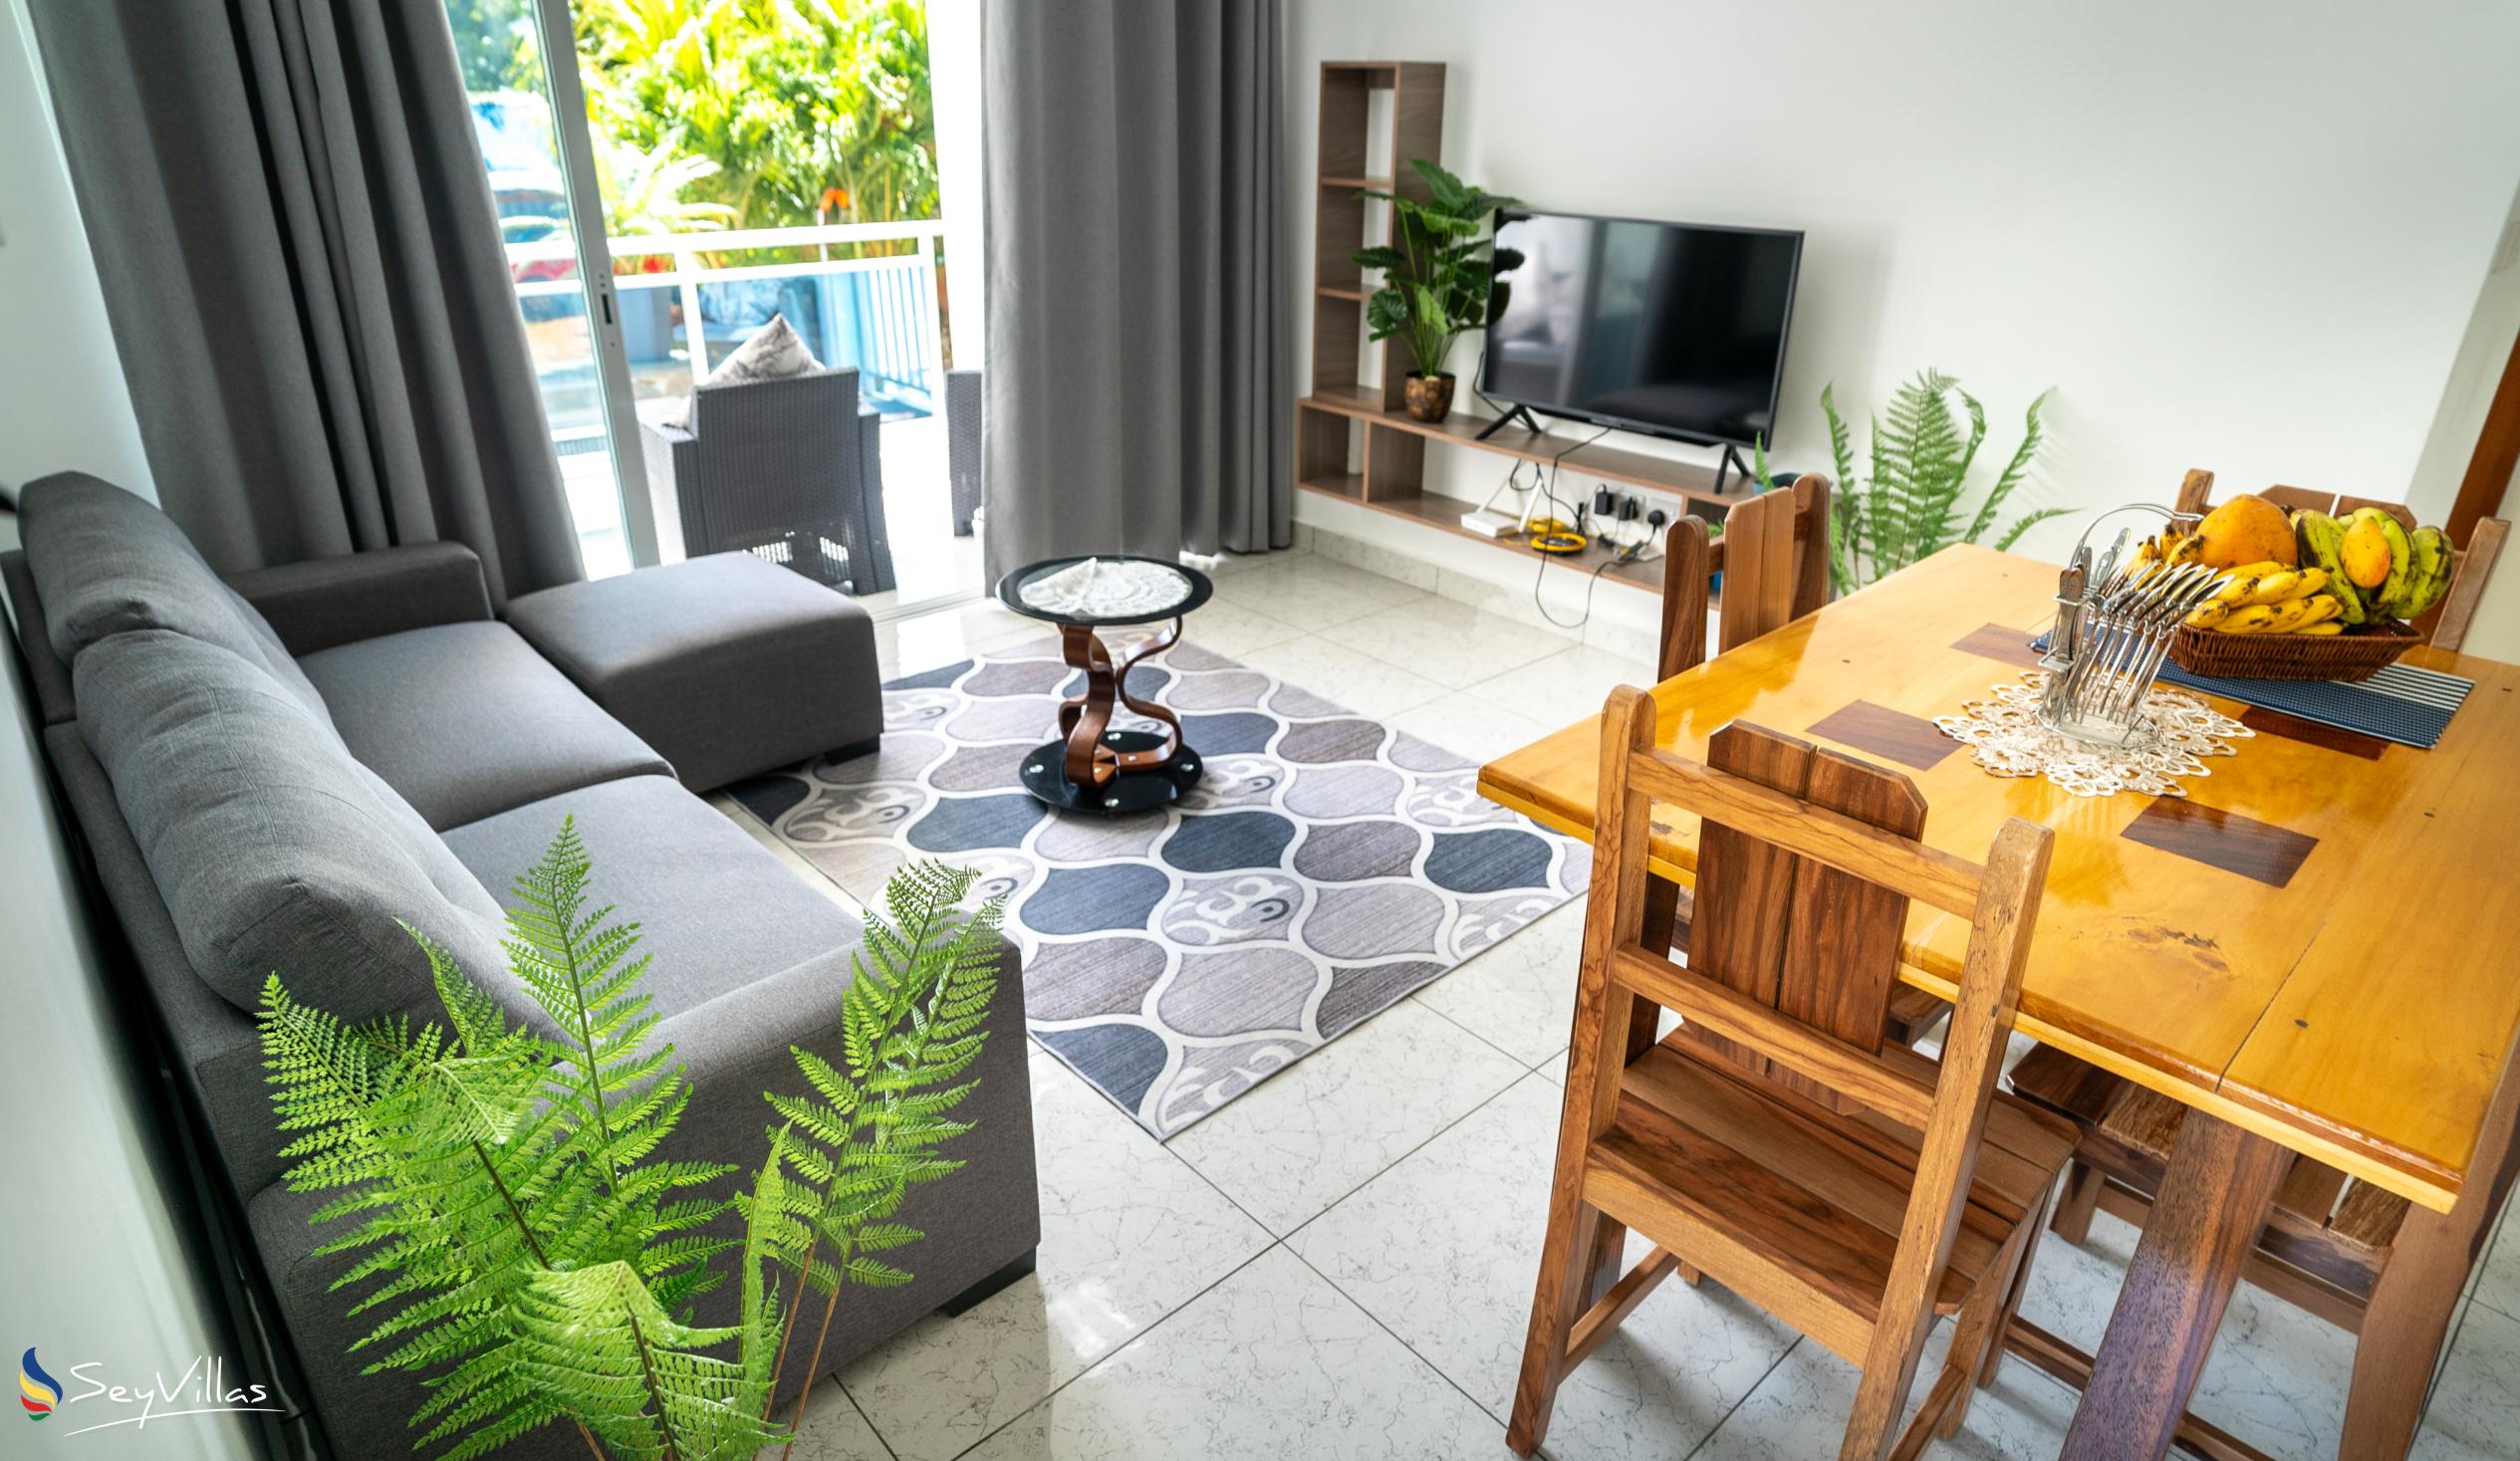 Photo 24: TES Self Catering - 1-Bedroom Apartment - Mahé (Seychelles)